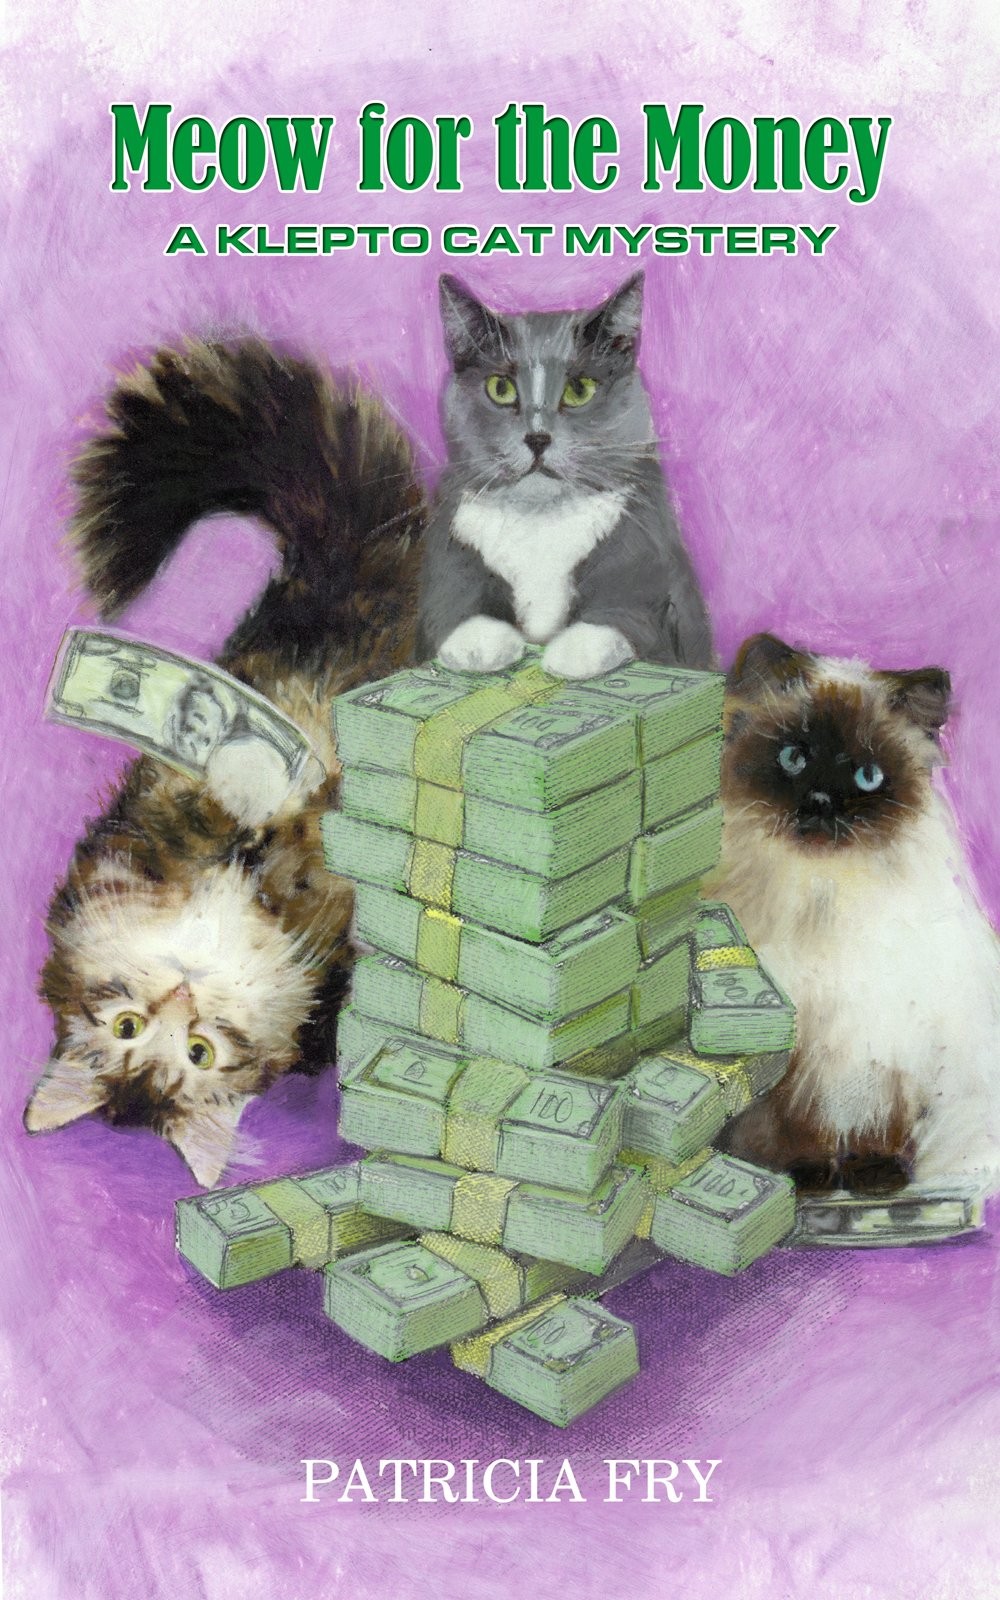 Meow for the Money